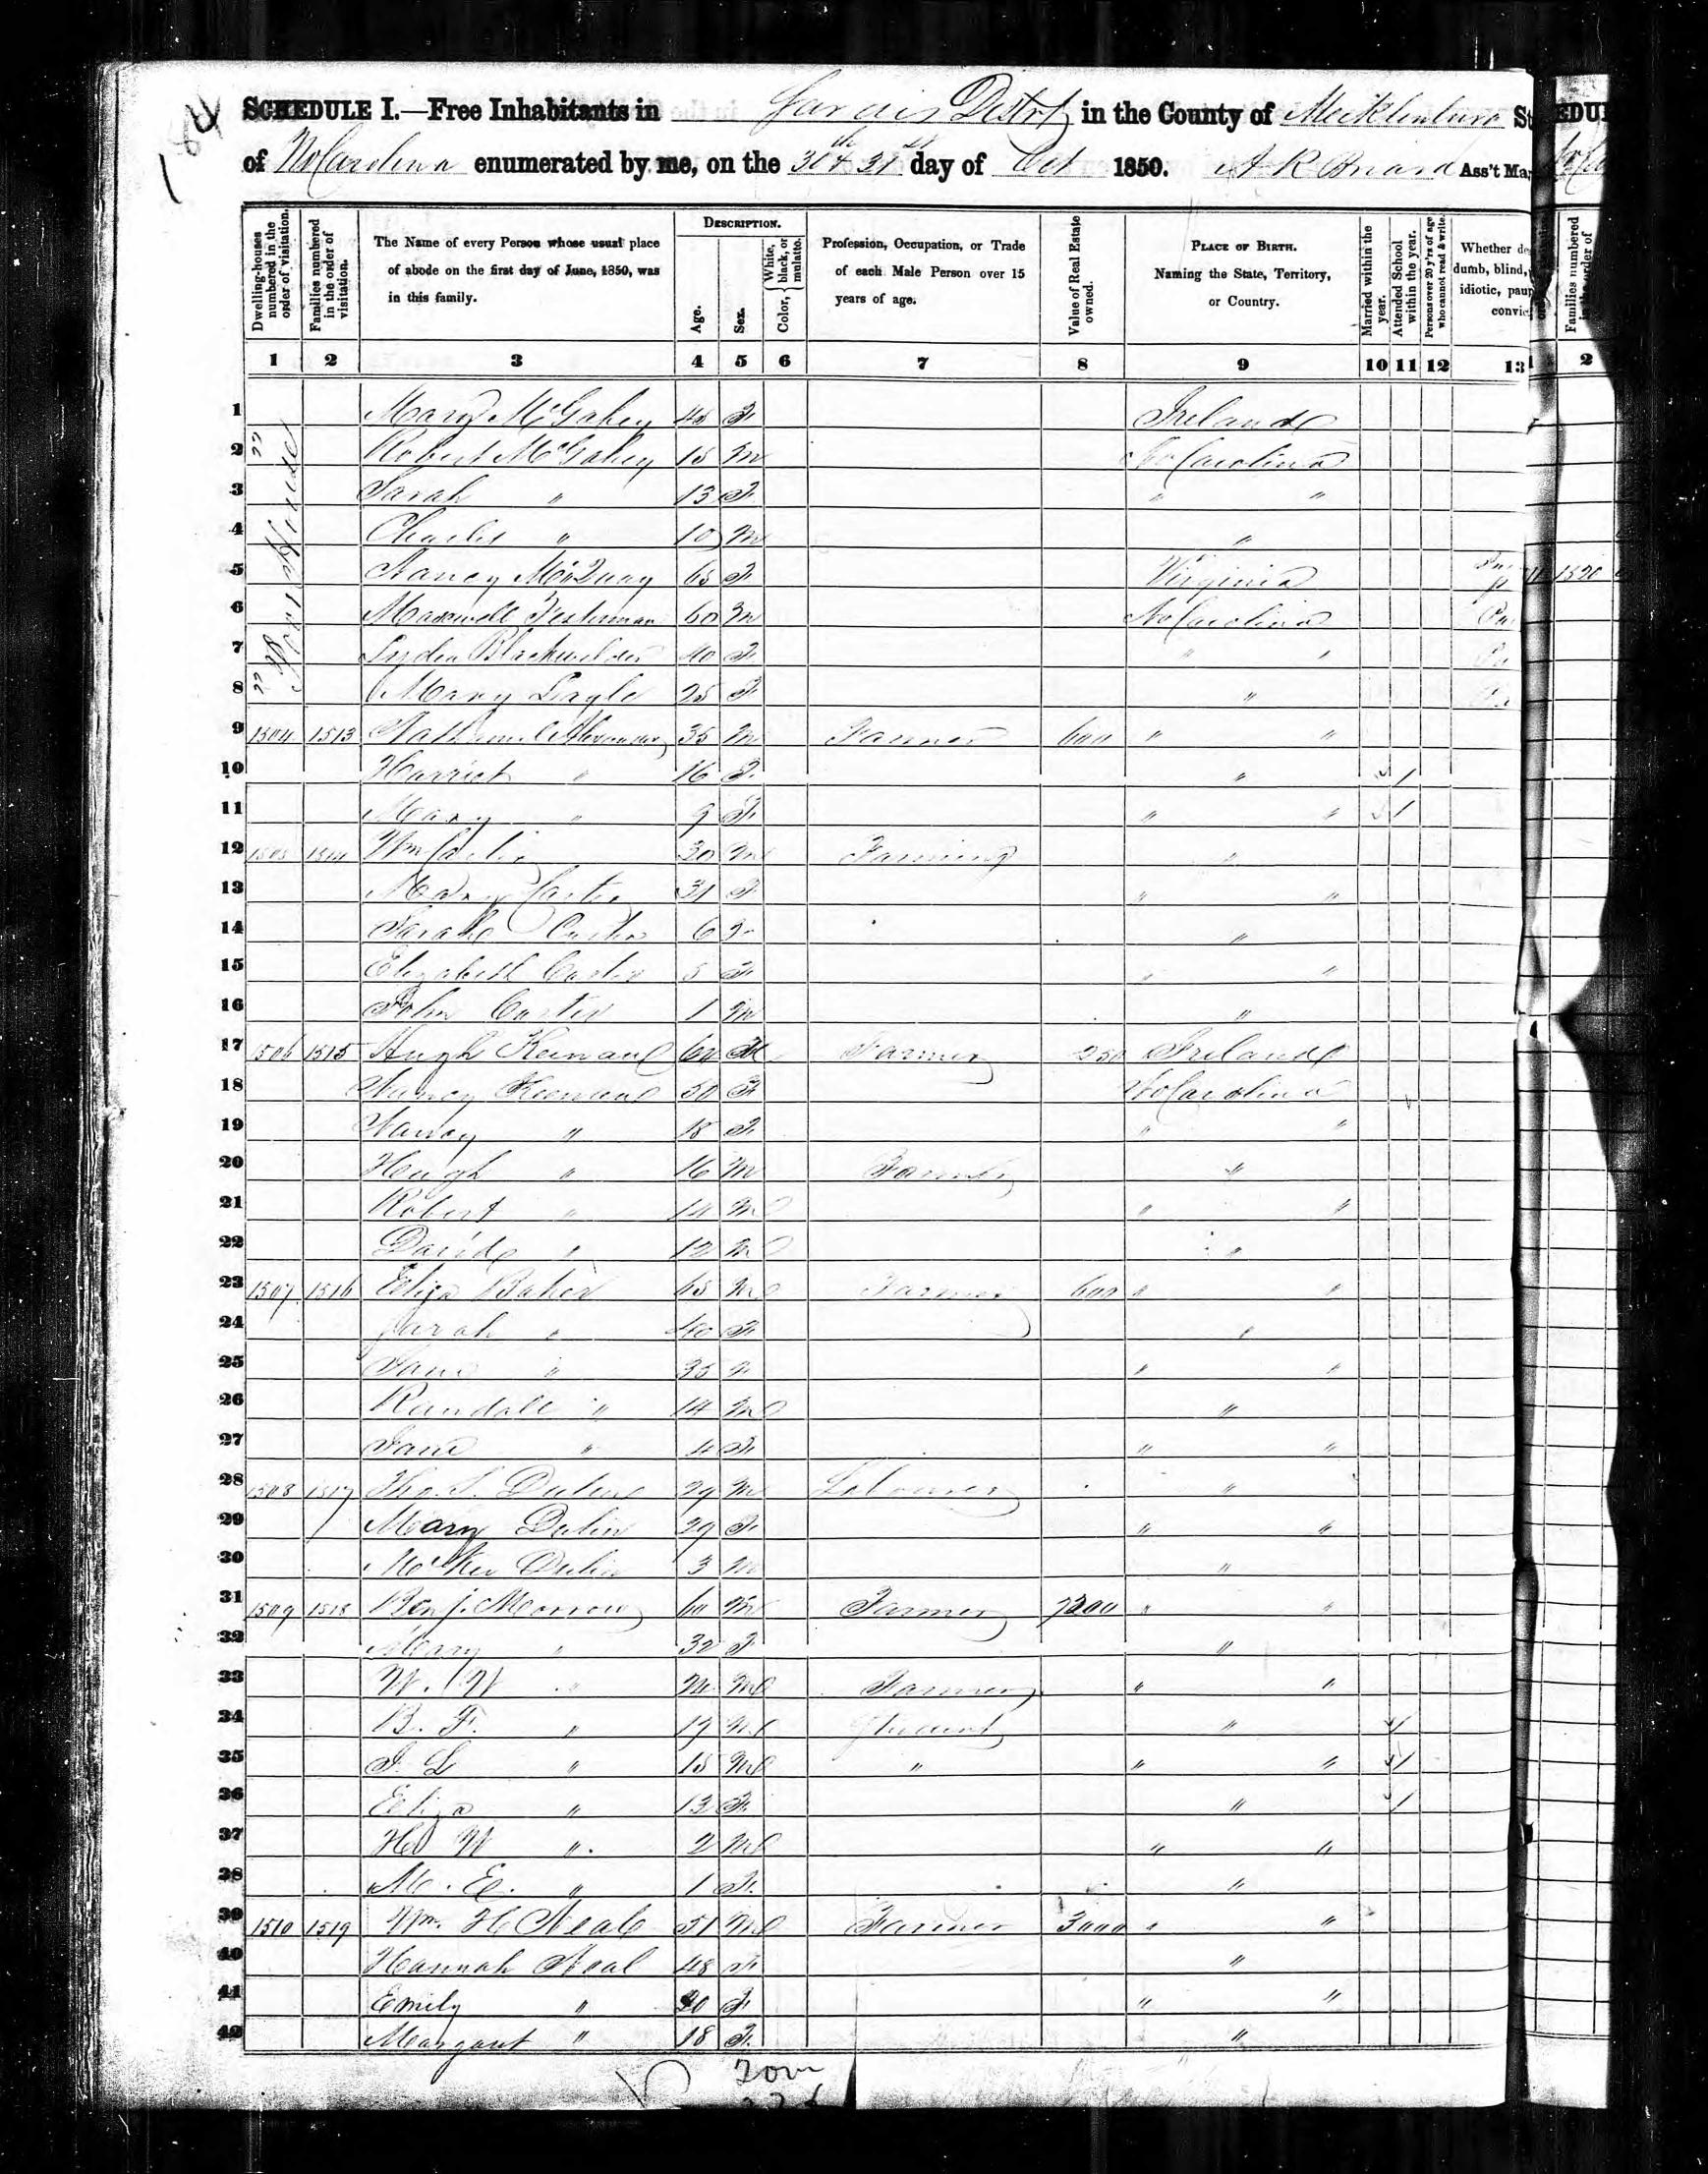 1850 Census, showing Poor House in Mecklenburg County